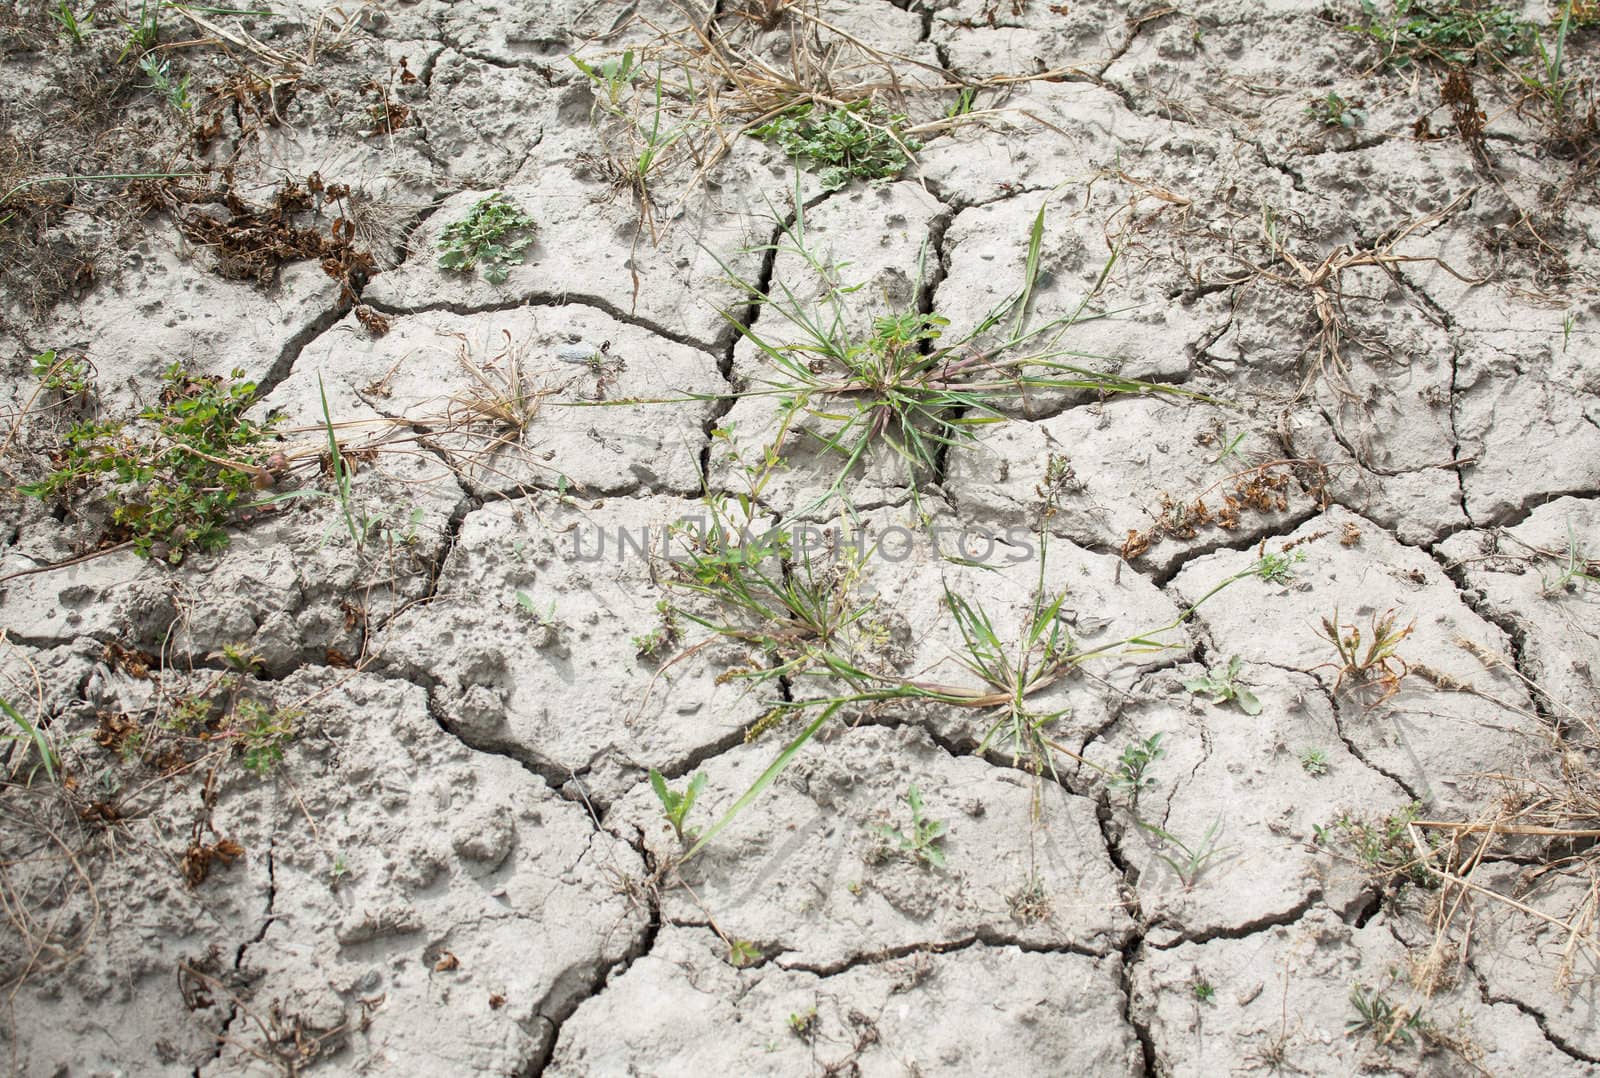 Closeup of a stretch of cracked, parched, dry land with some green grass coming through despite the drought.